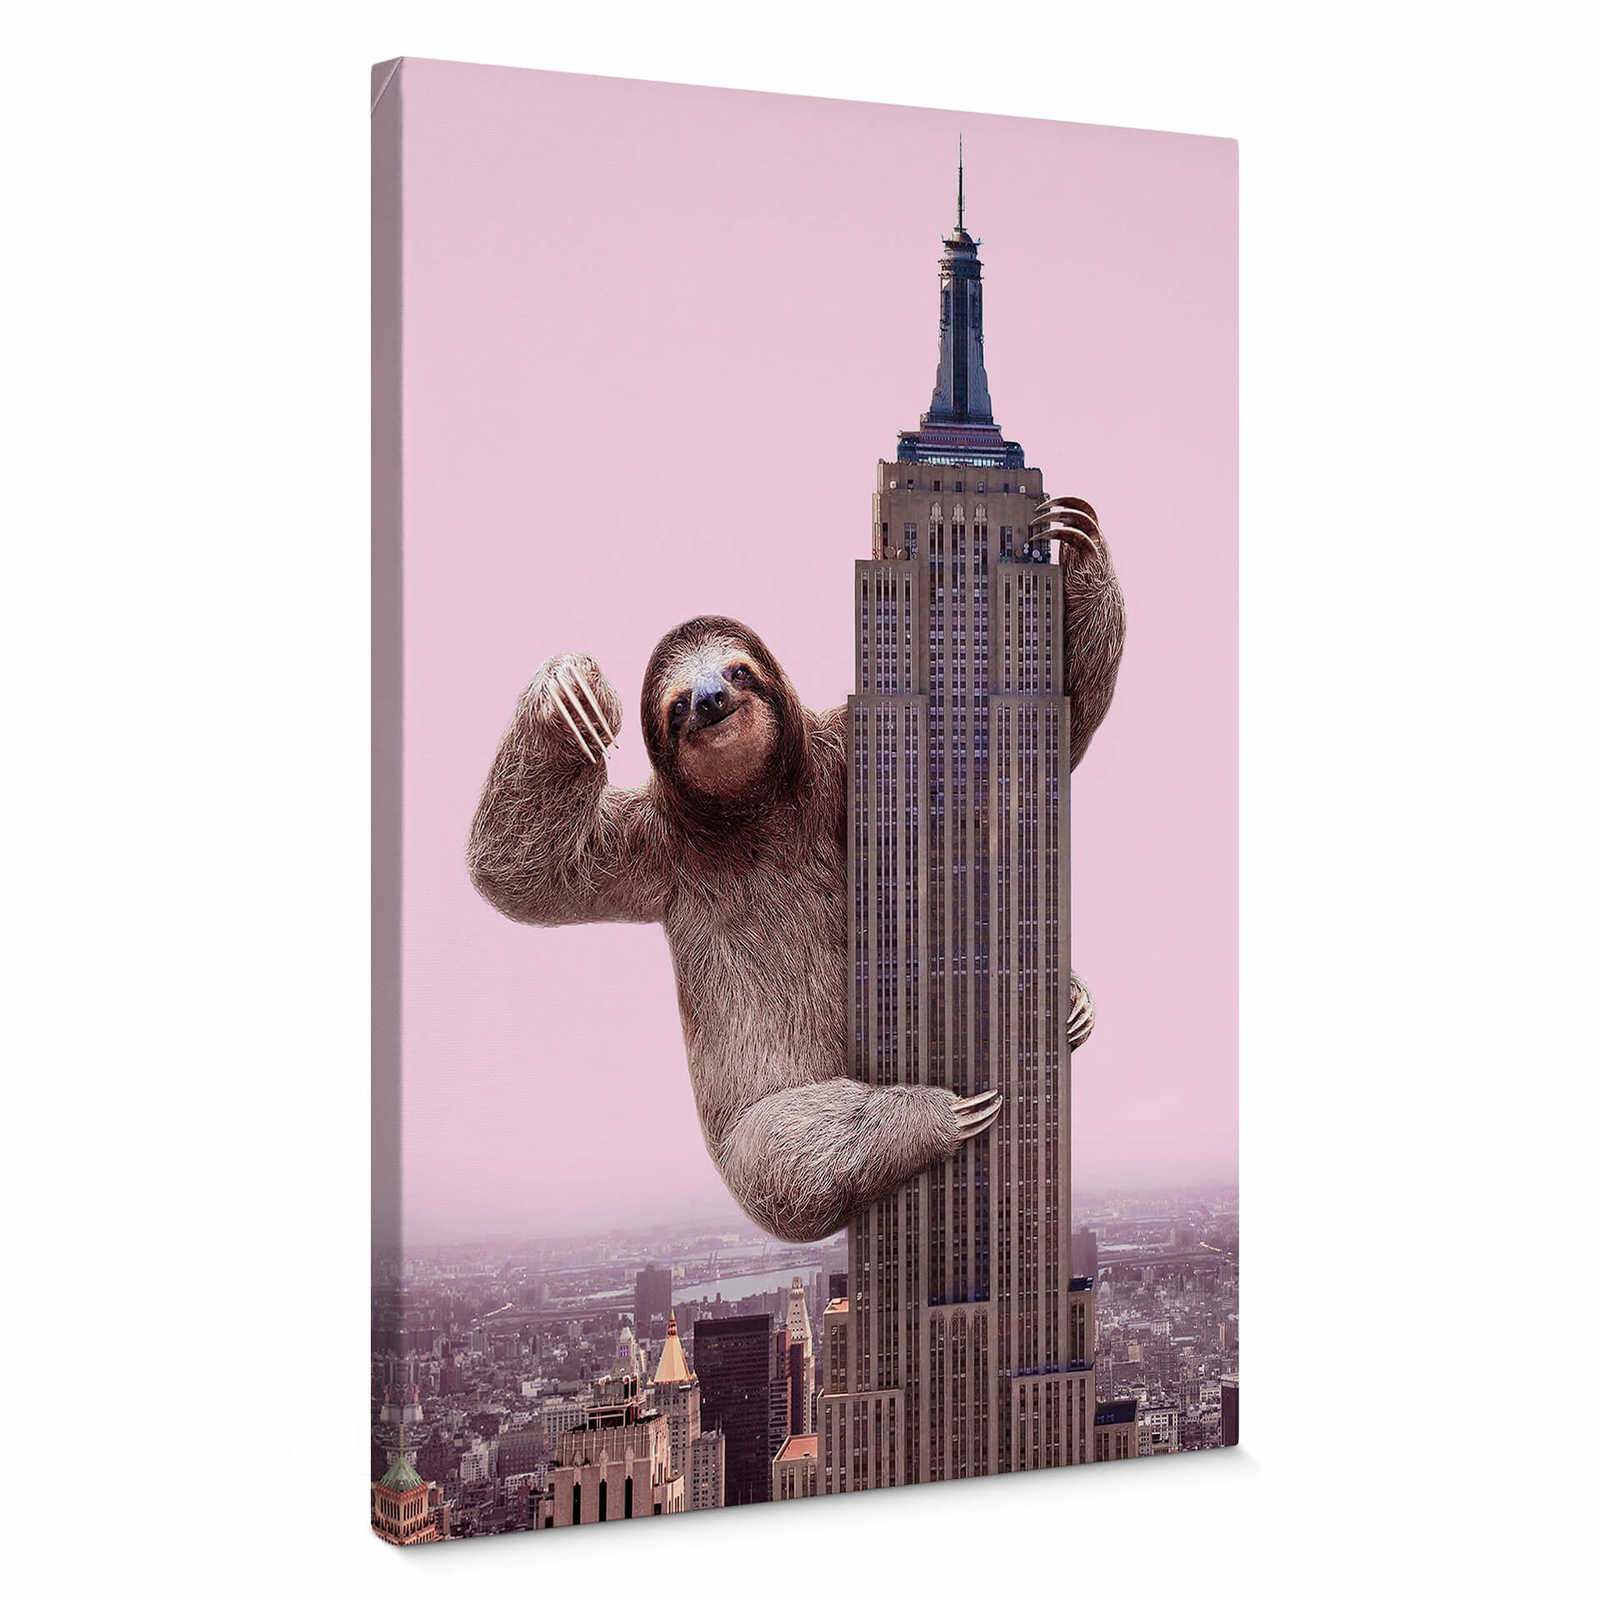         Canvas print sloth by Fuentes, "King Sloth" – colourful
    